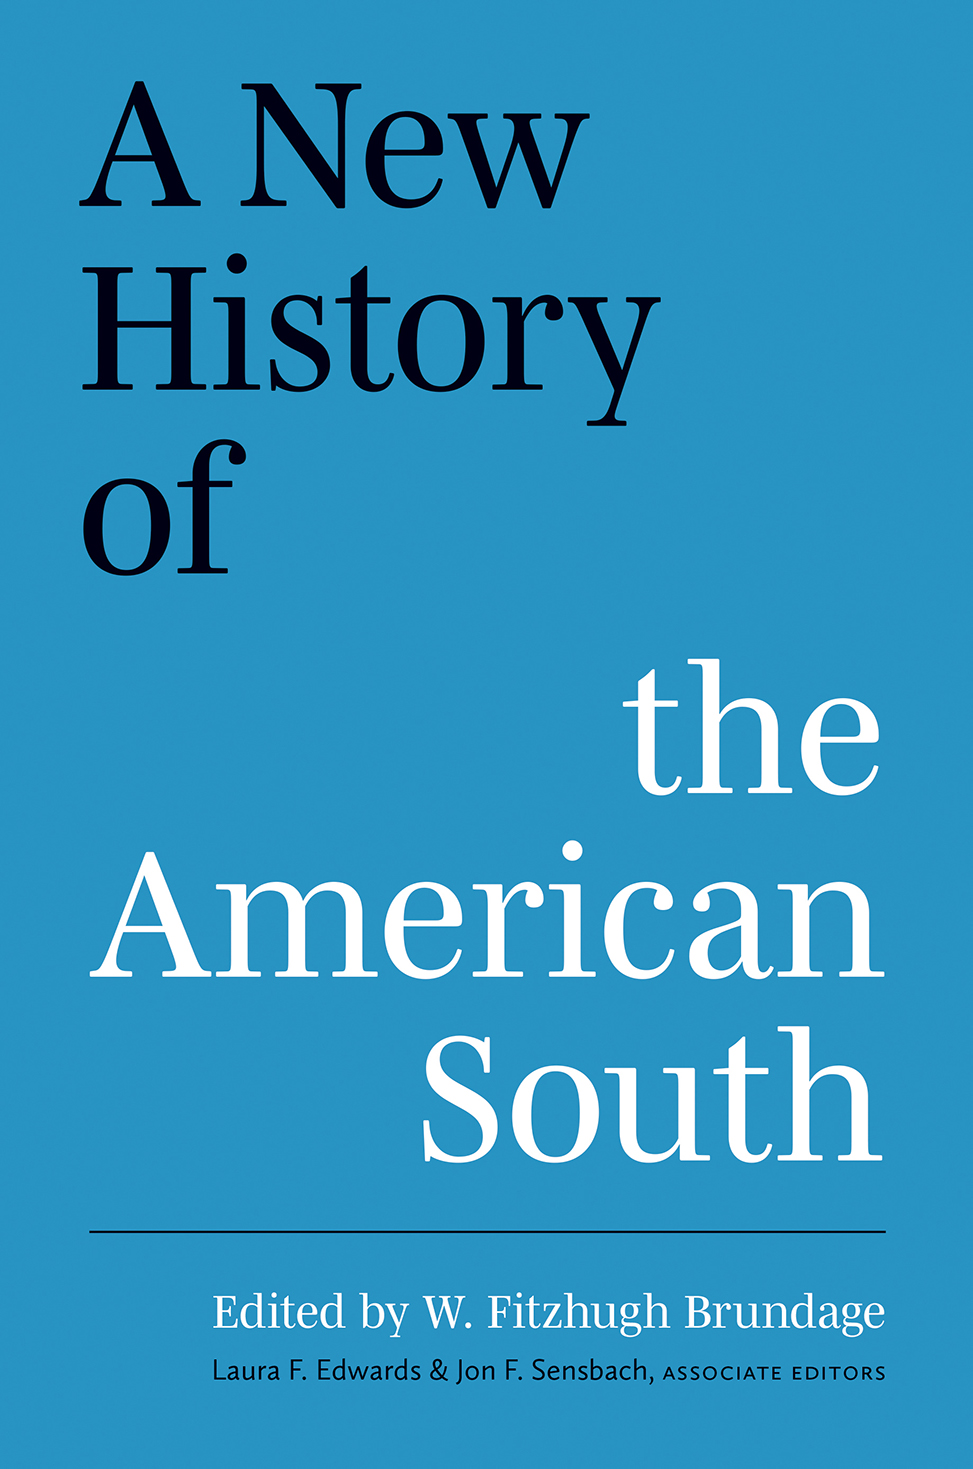 The book cover for A New History of the American South.